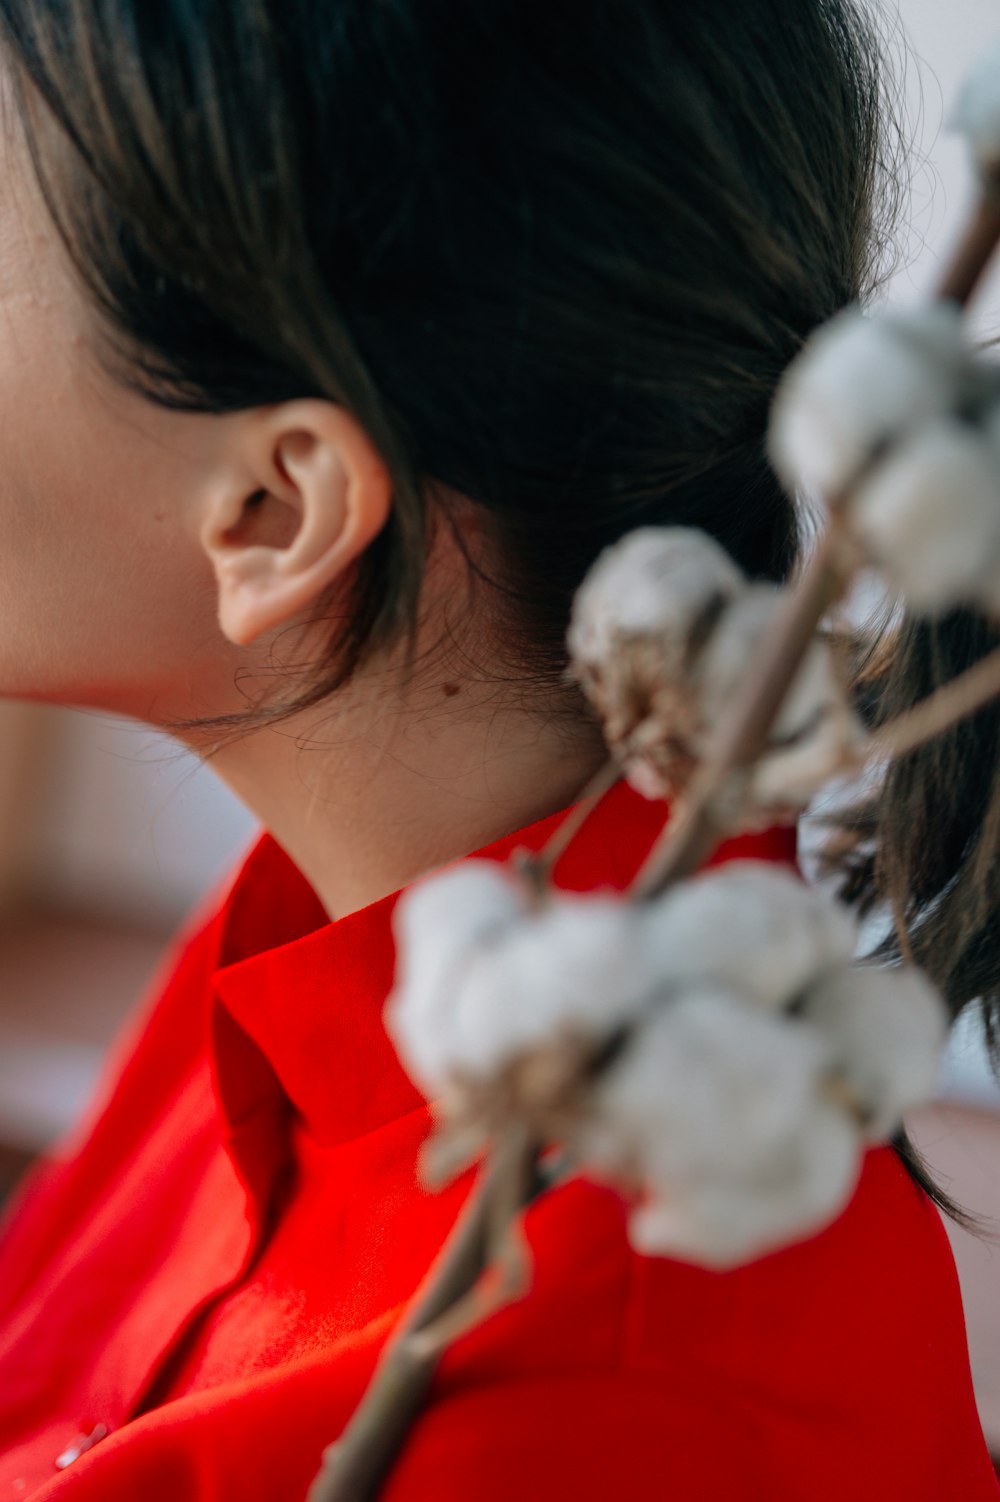 woman in red shirt with white flowers on ear